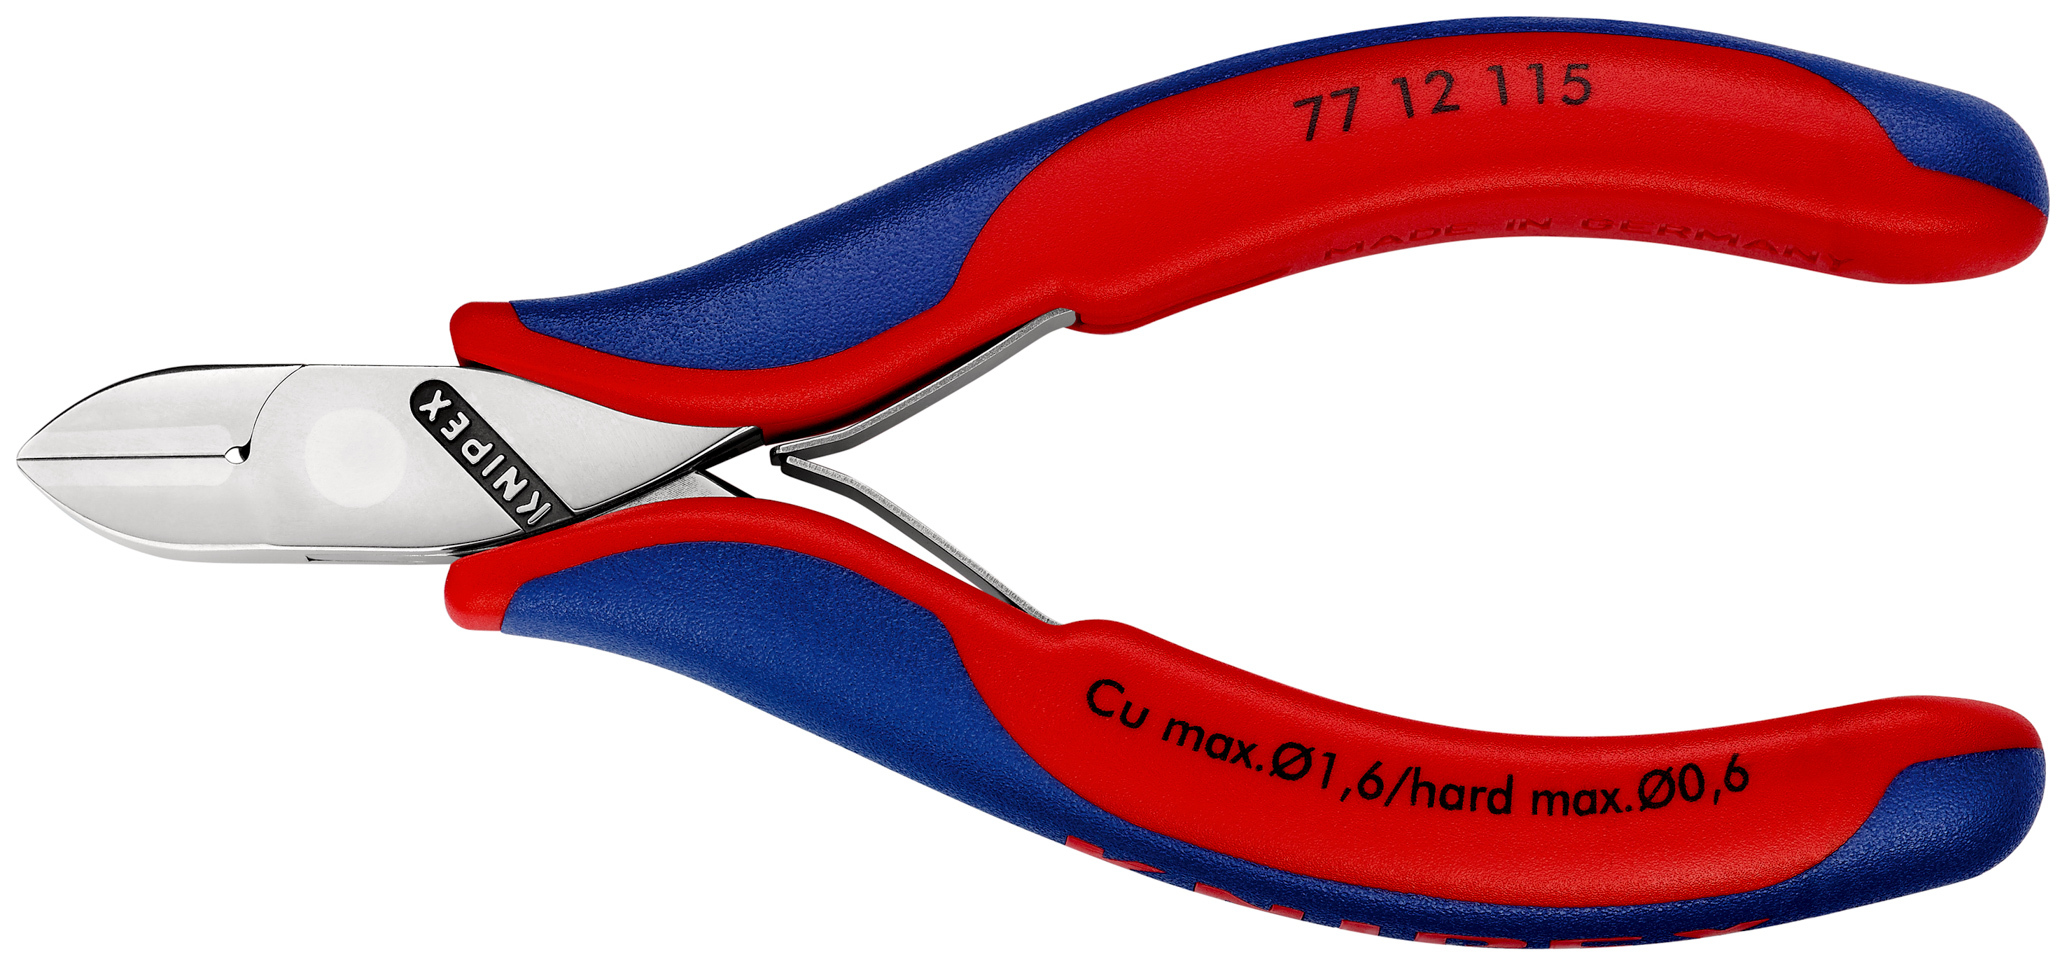 Pince coupante cote electro 115mm KNIPEX - 77 12 115